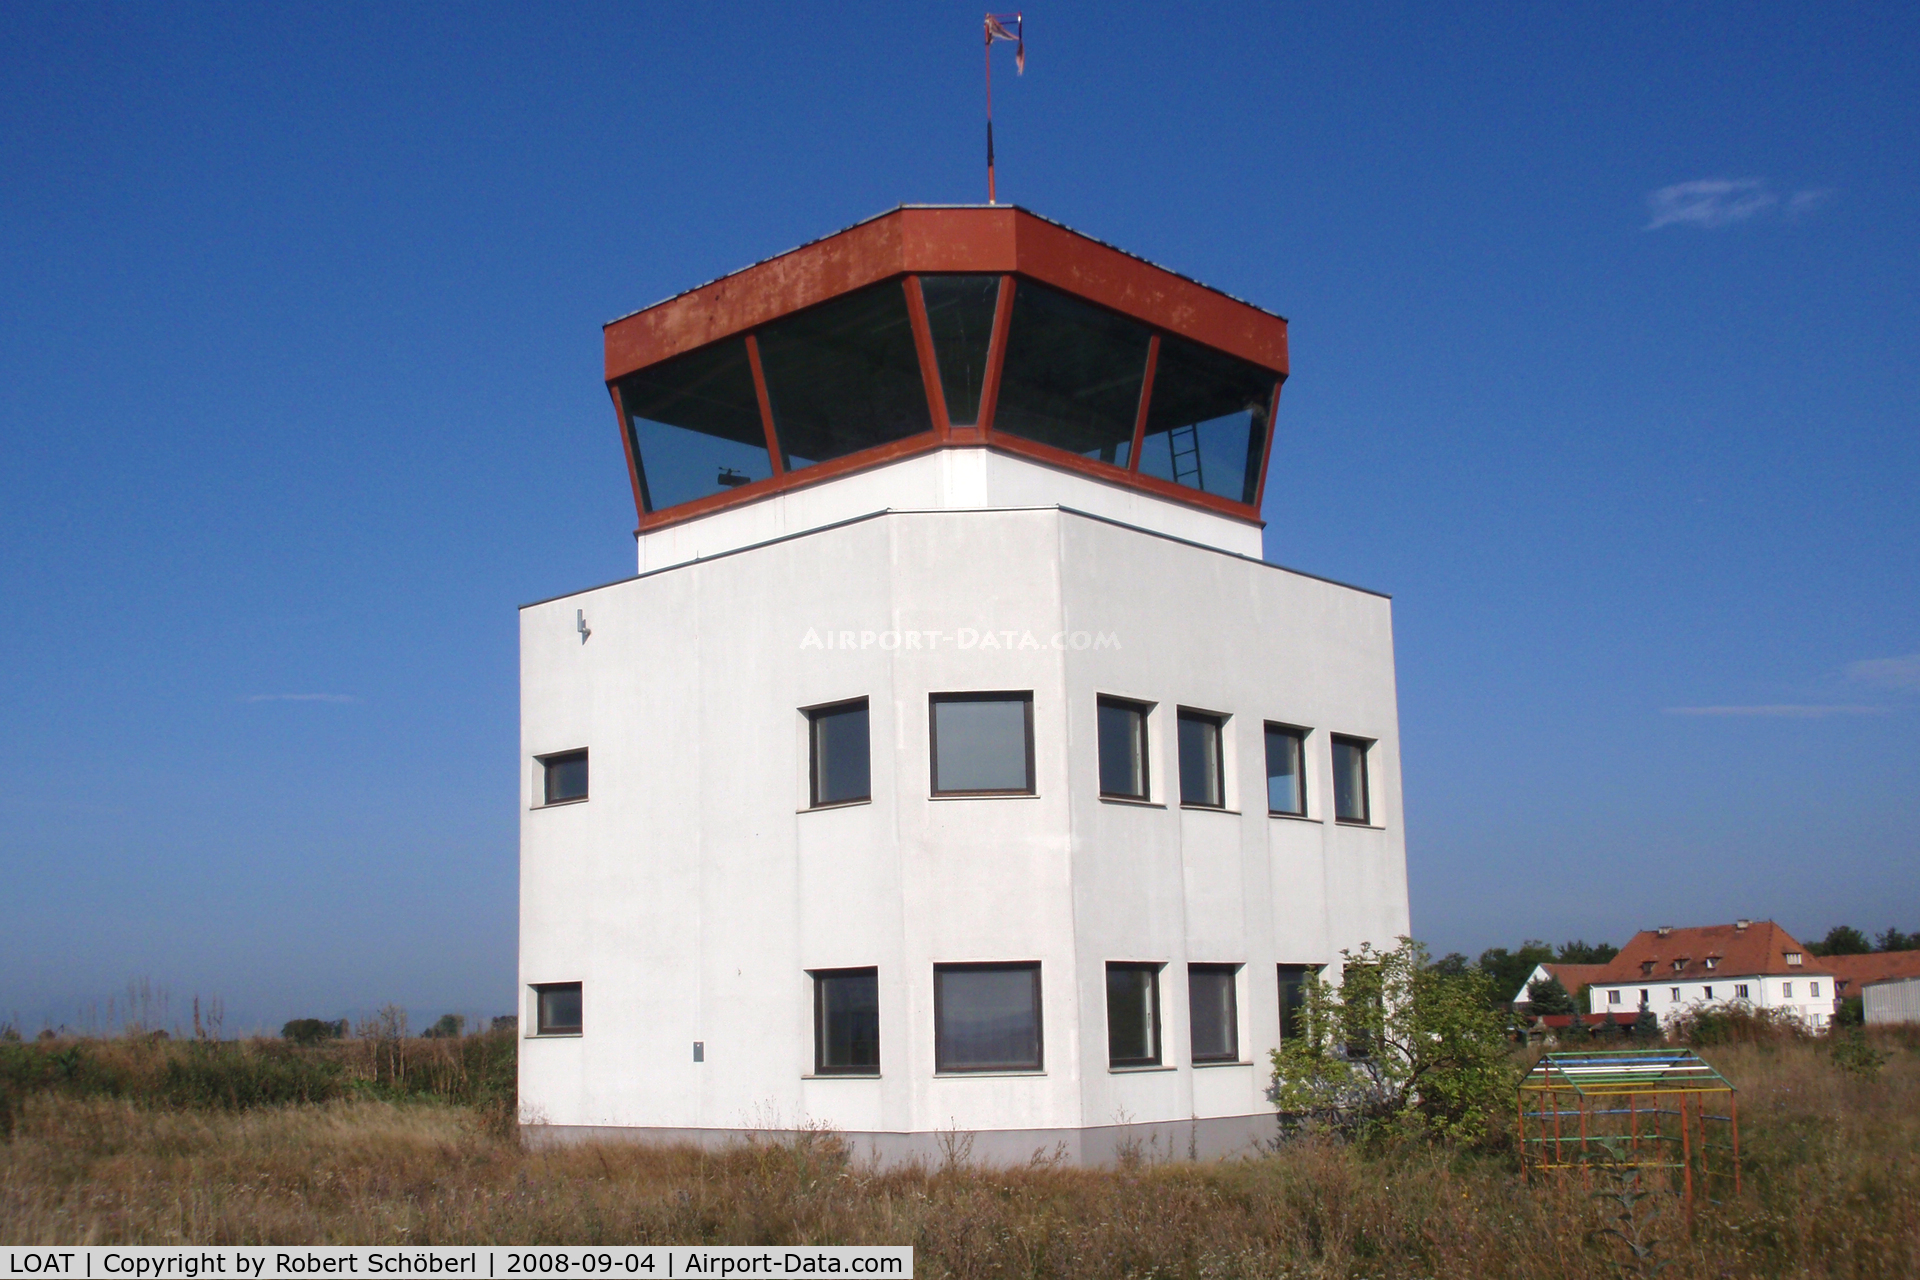 LOAT Airport - This airfield in Trausdorf (Austria) was closed in 1994